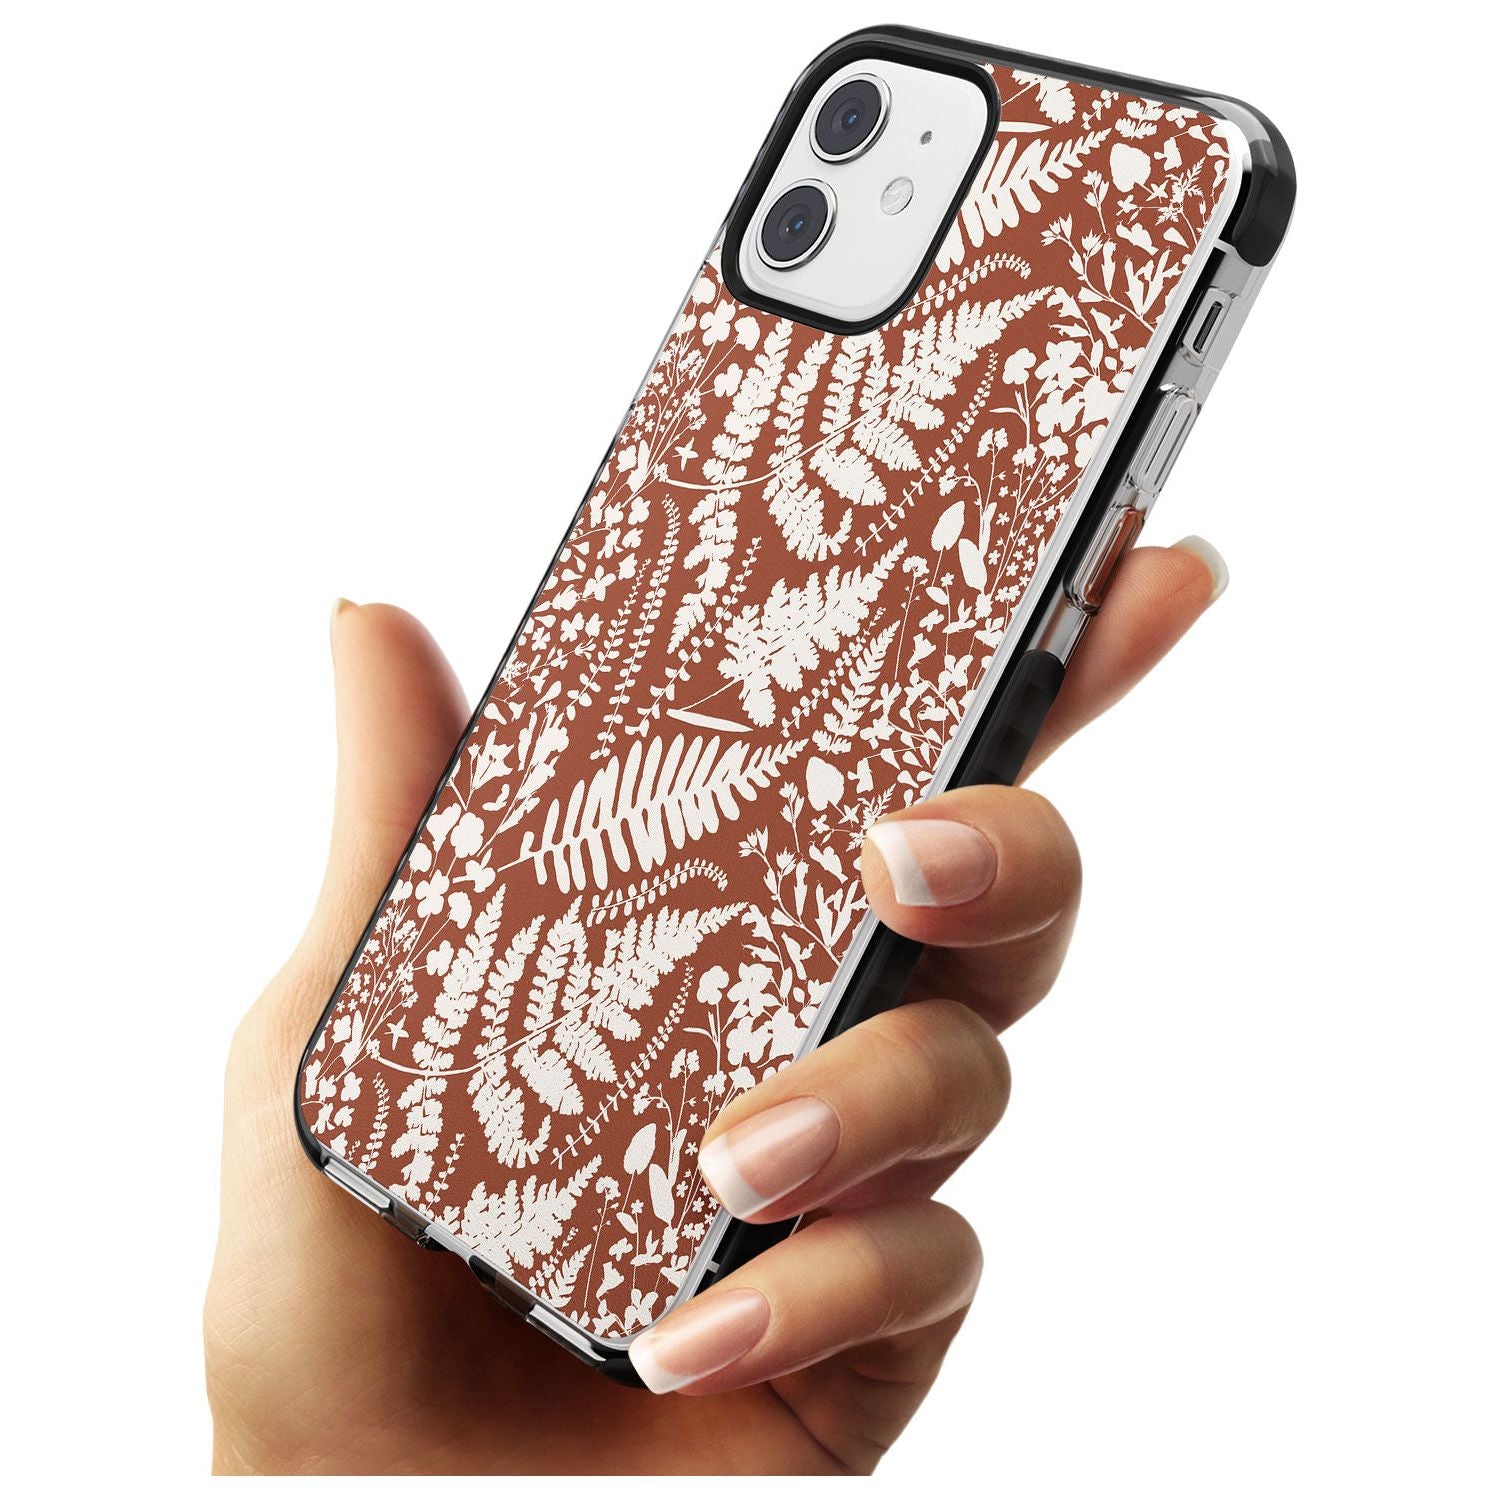 Wildflowers and Ferns on Terracotta Black Impact Phone Case for iPhone 11